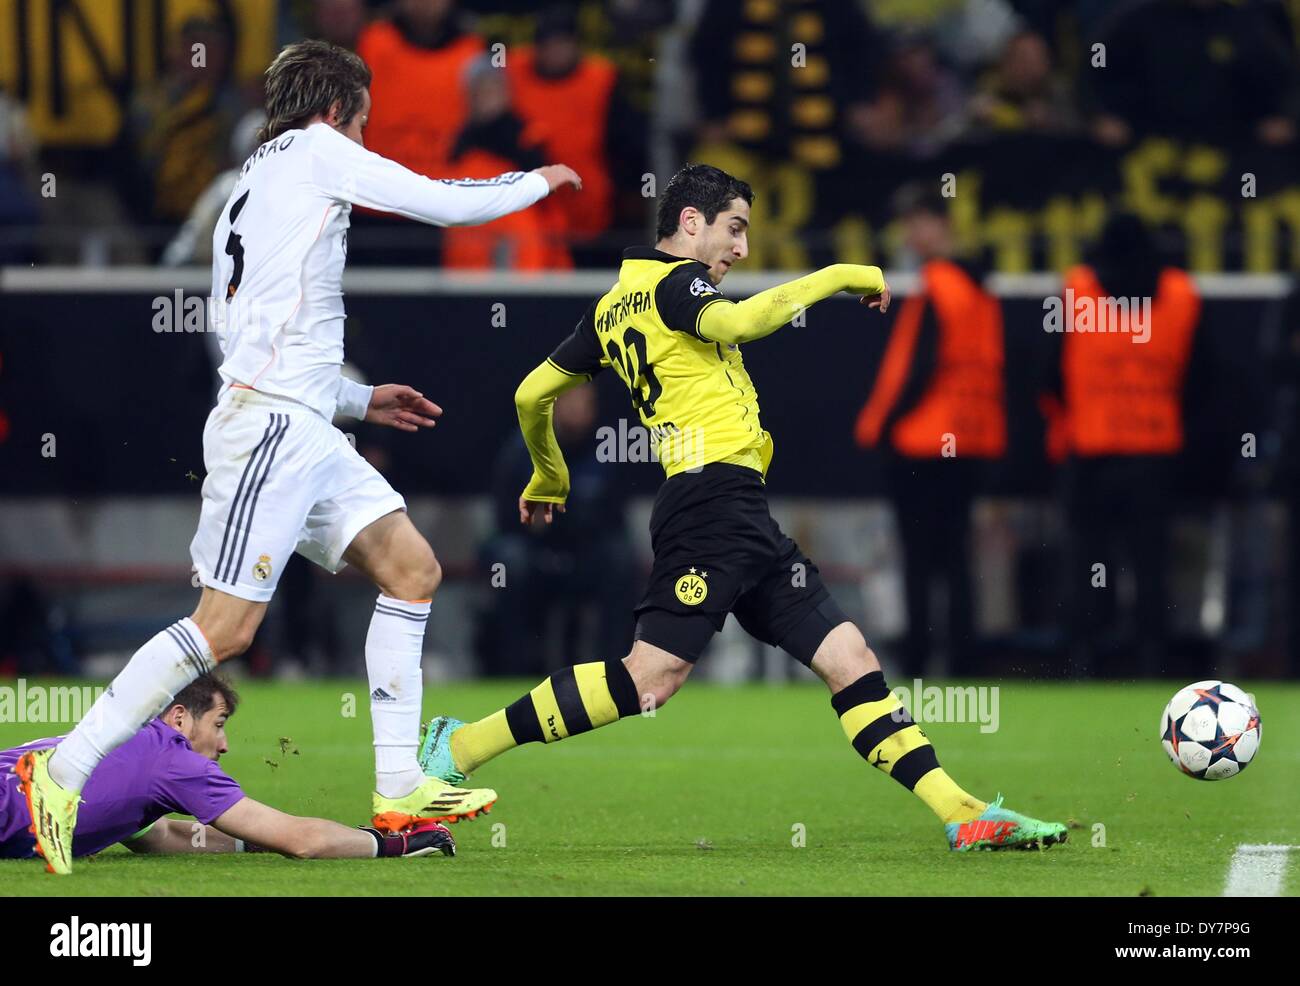 Dortmund, Germany. 08th Apr, 2014. Dortmund's Henrikh Mkhitaryan (R) in action against Madrid's Iker Casillas (L) and Fabio Coentrao (C) during the UEFA Champions League quarter-final second leg soccer match between Borussia Dortmund and Real Madrid at the BVB stadium in Dortmund, Germany, 08 April 2014. Real lost 2-0 in Dortmund, on a first-half brace from Marco Reus, but scraped through on a 3-2 aggregate thanks to winning the first leg 3-0. Photo: Friso Gentsch/dpa/Alamy Live News Stock Photo